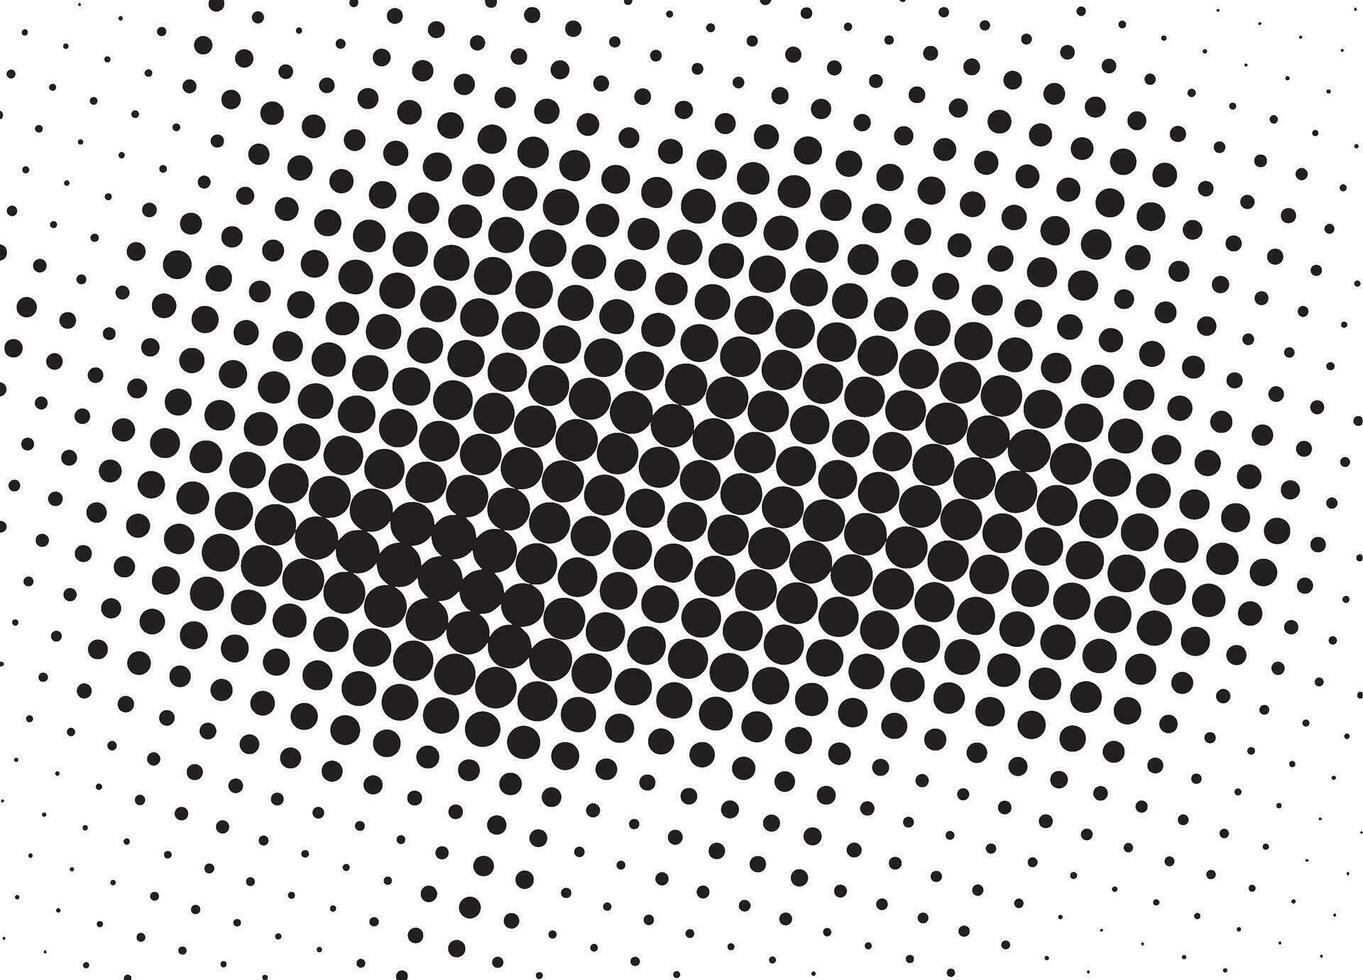 a black and white halftone dot pattern, black and white Halftone dots effect. Halftone effect vector pattern. Circle dots isolated on the white background